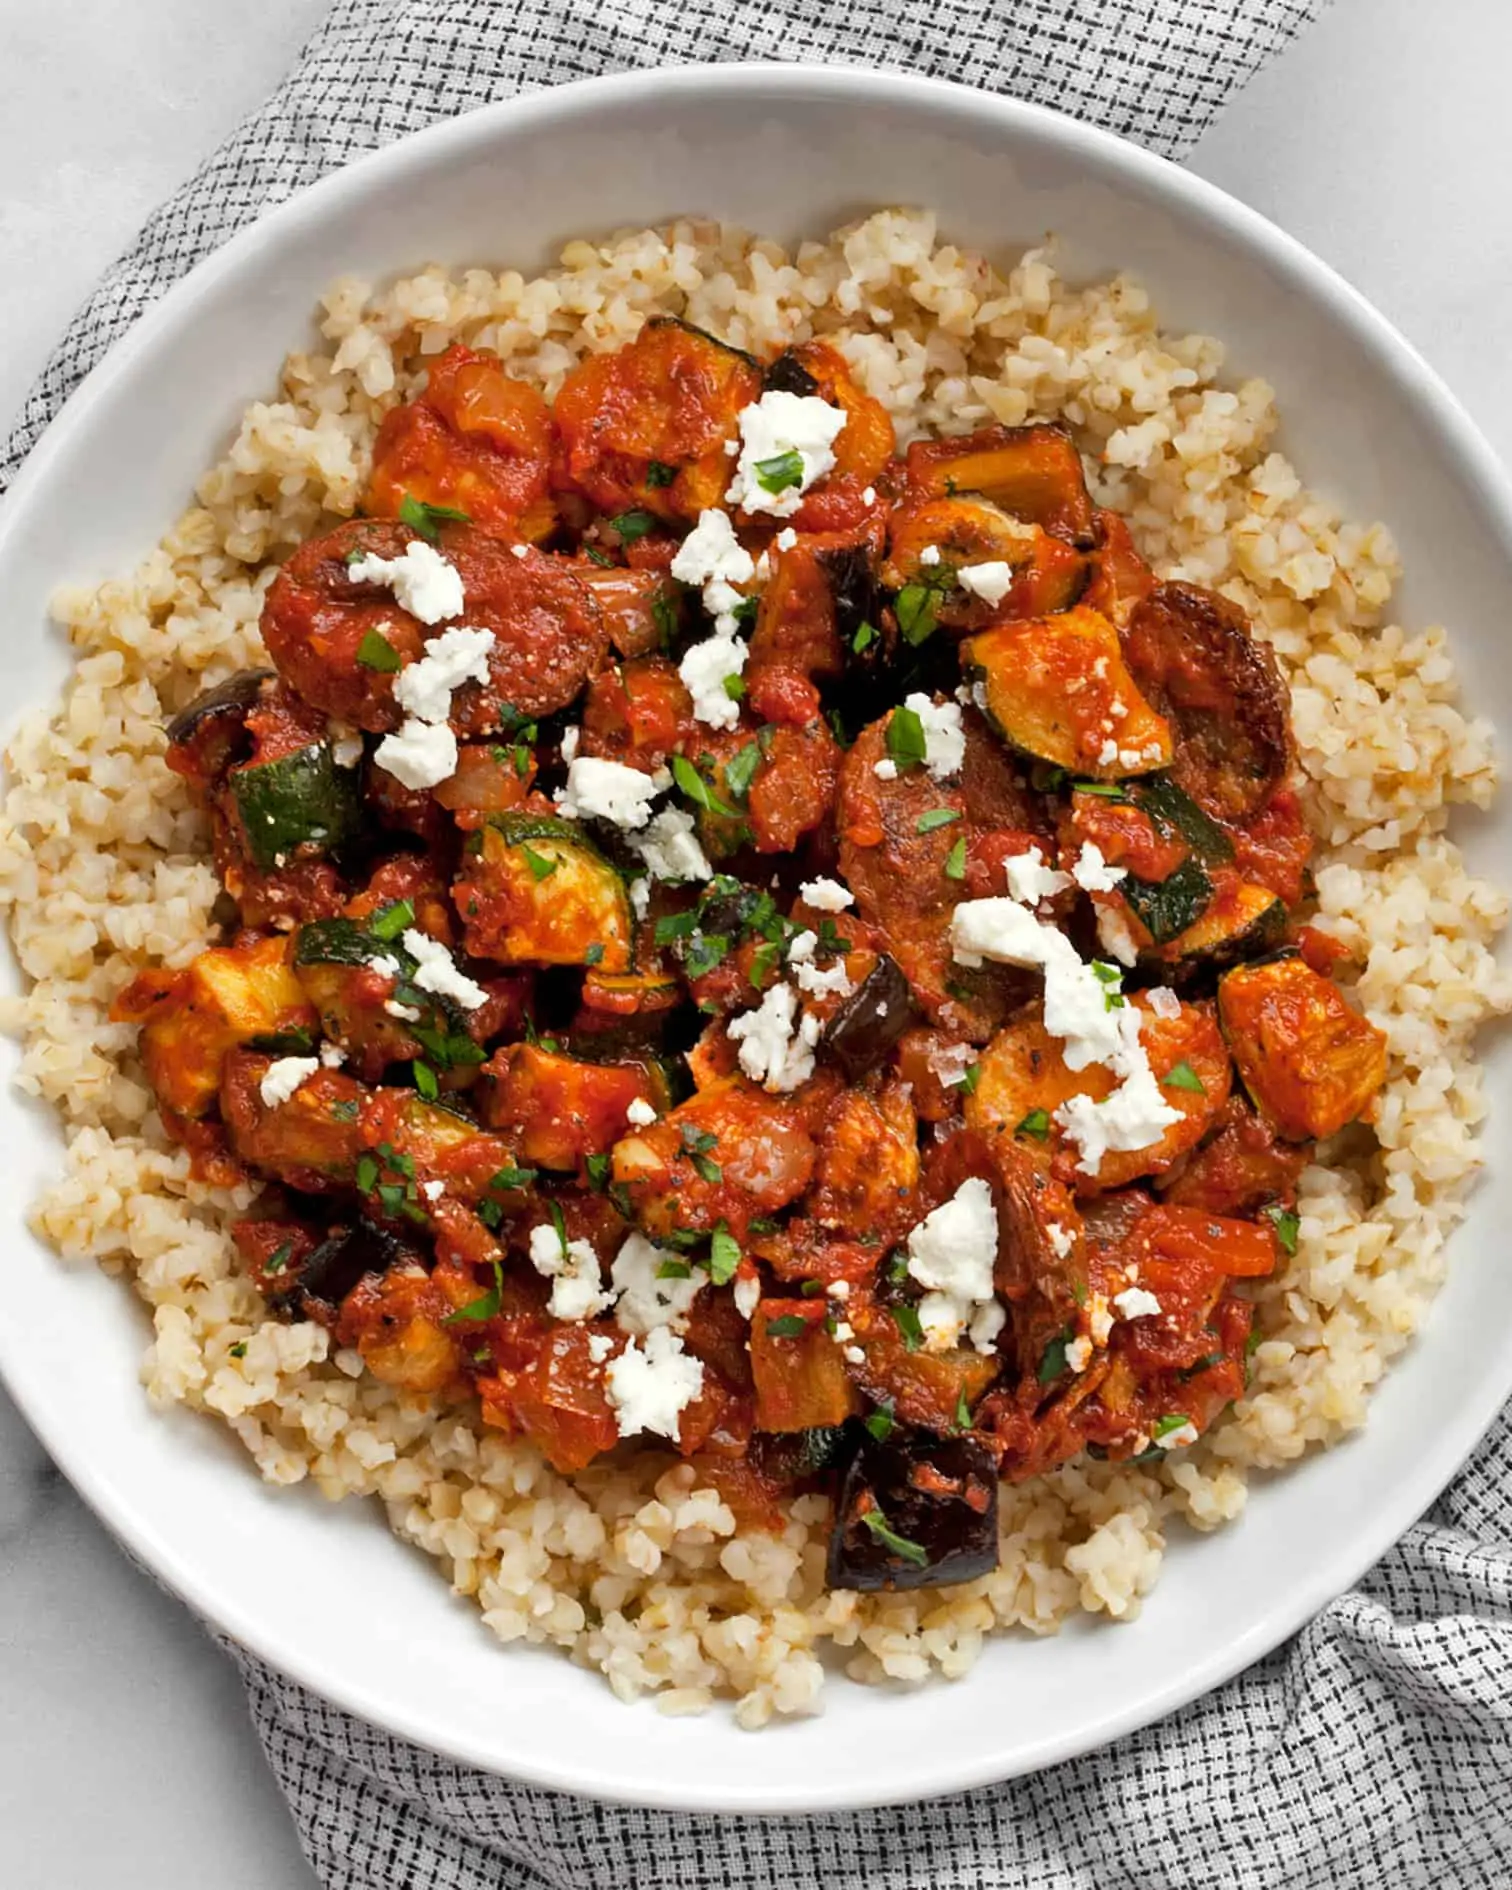 Roasted Eggplant Zucchini Tomato Stew with couscous